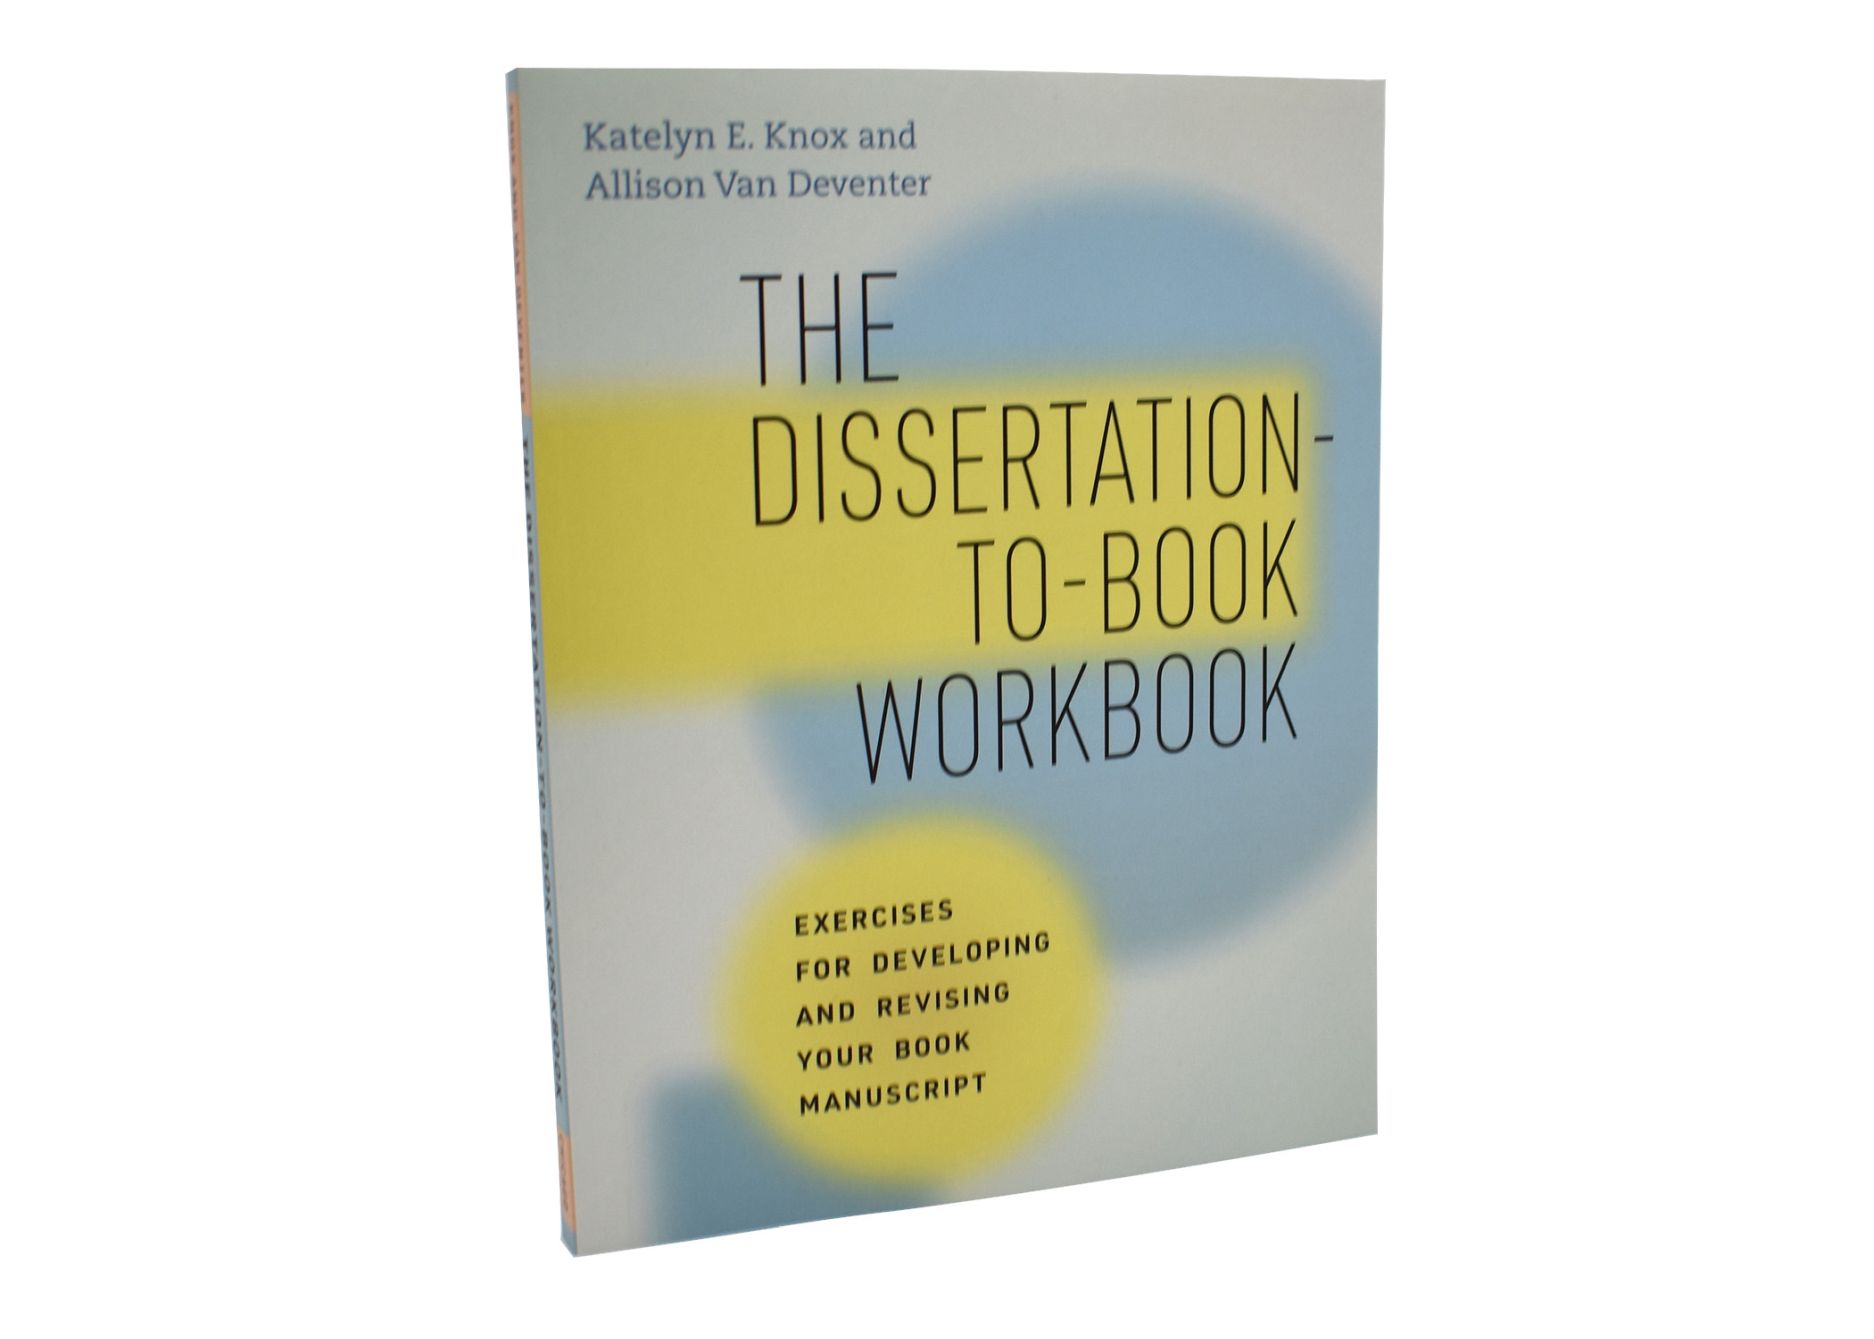 Dissertation to Book Workbook 01 - click to open lightbox